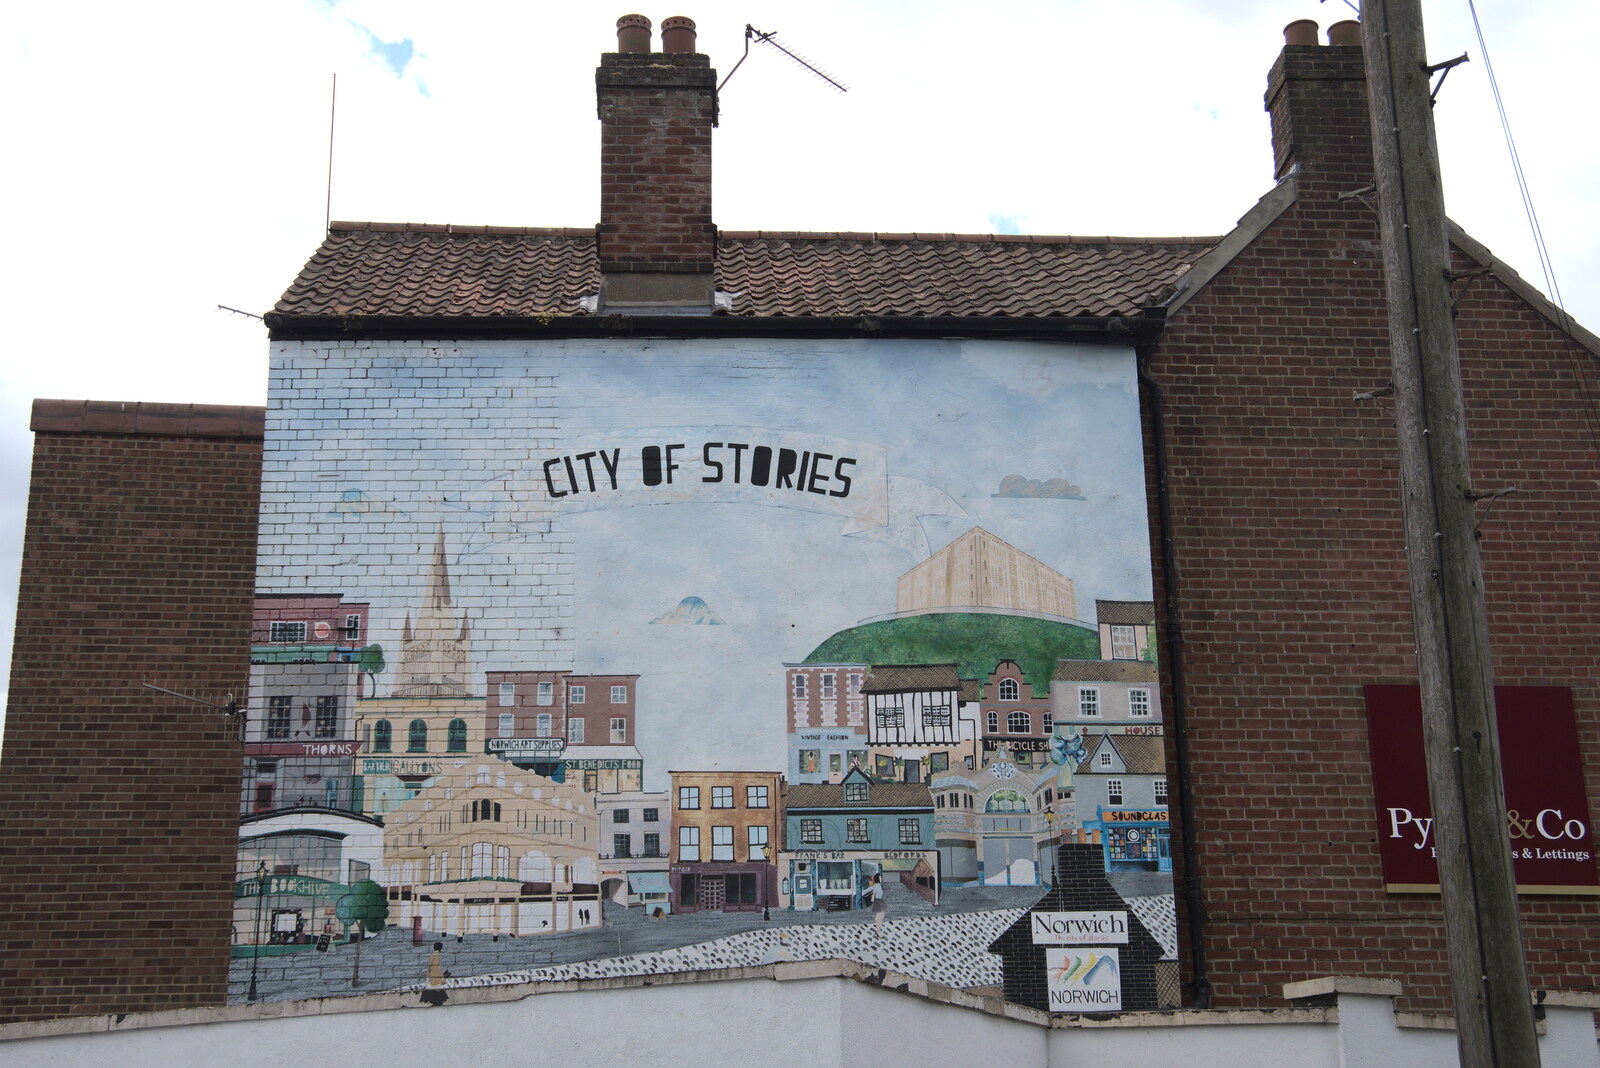 A City of Stories mural  from The Lord Mayor's Procession, Norwich, Norfolk - 2nd July 2022